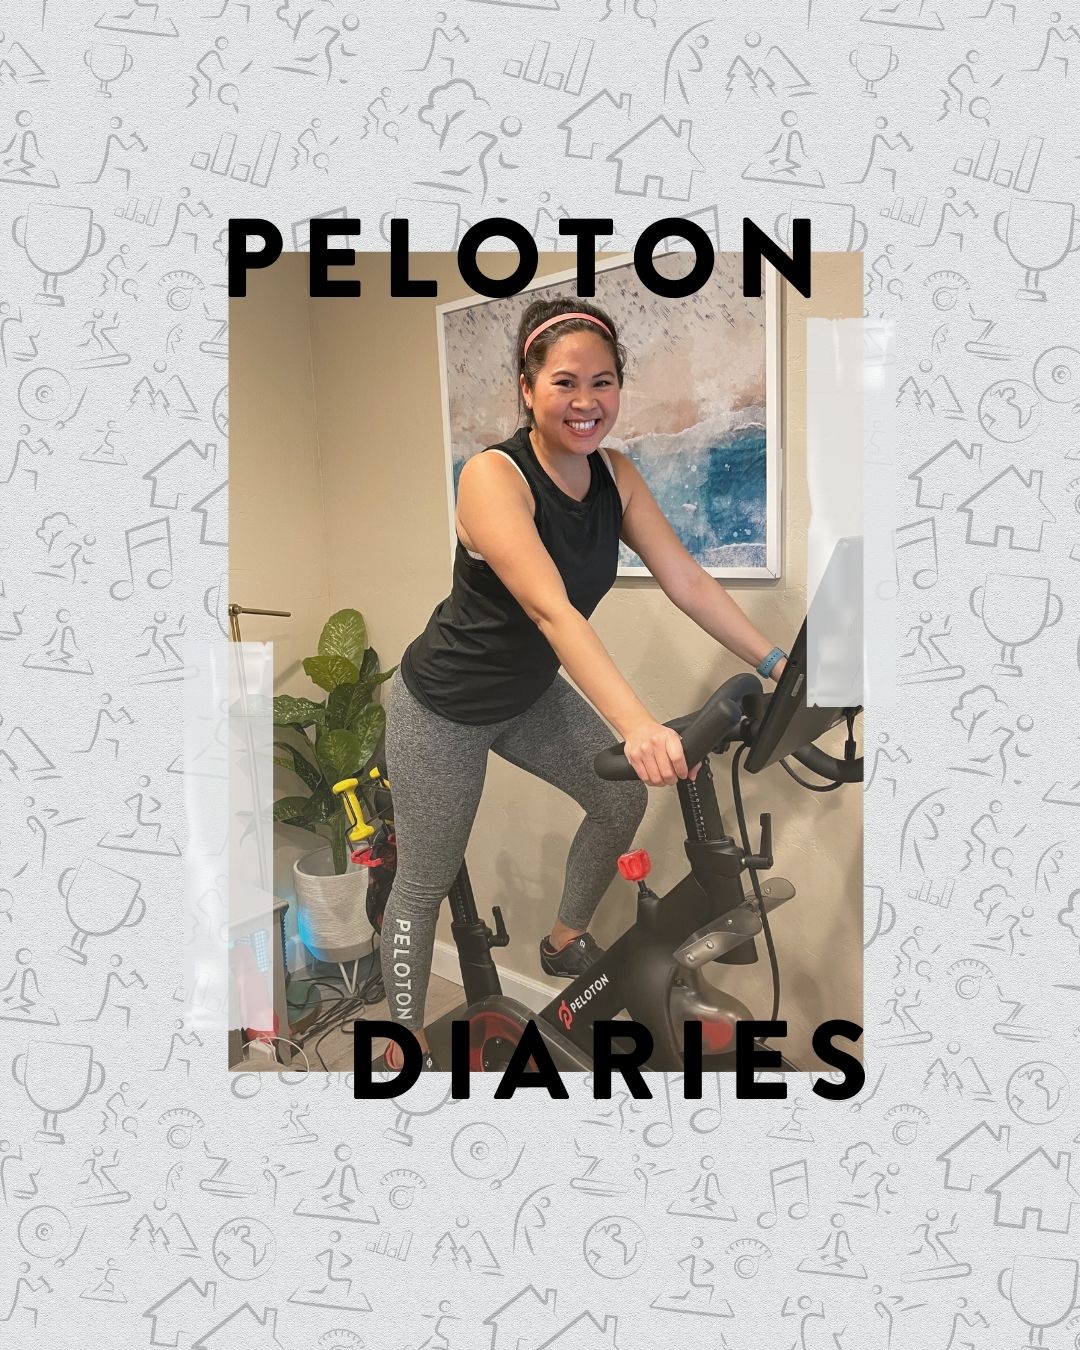 A Week of Peloton Workouts While Caring for My Children 24/7